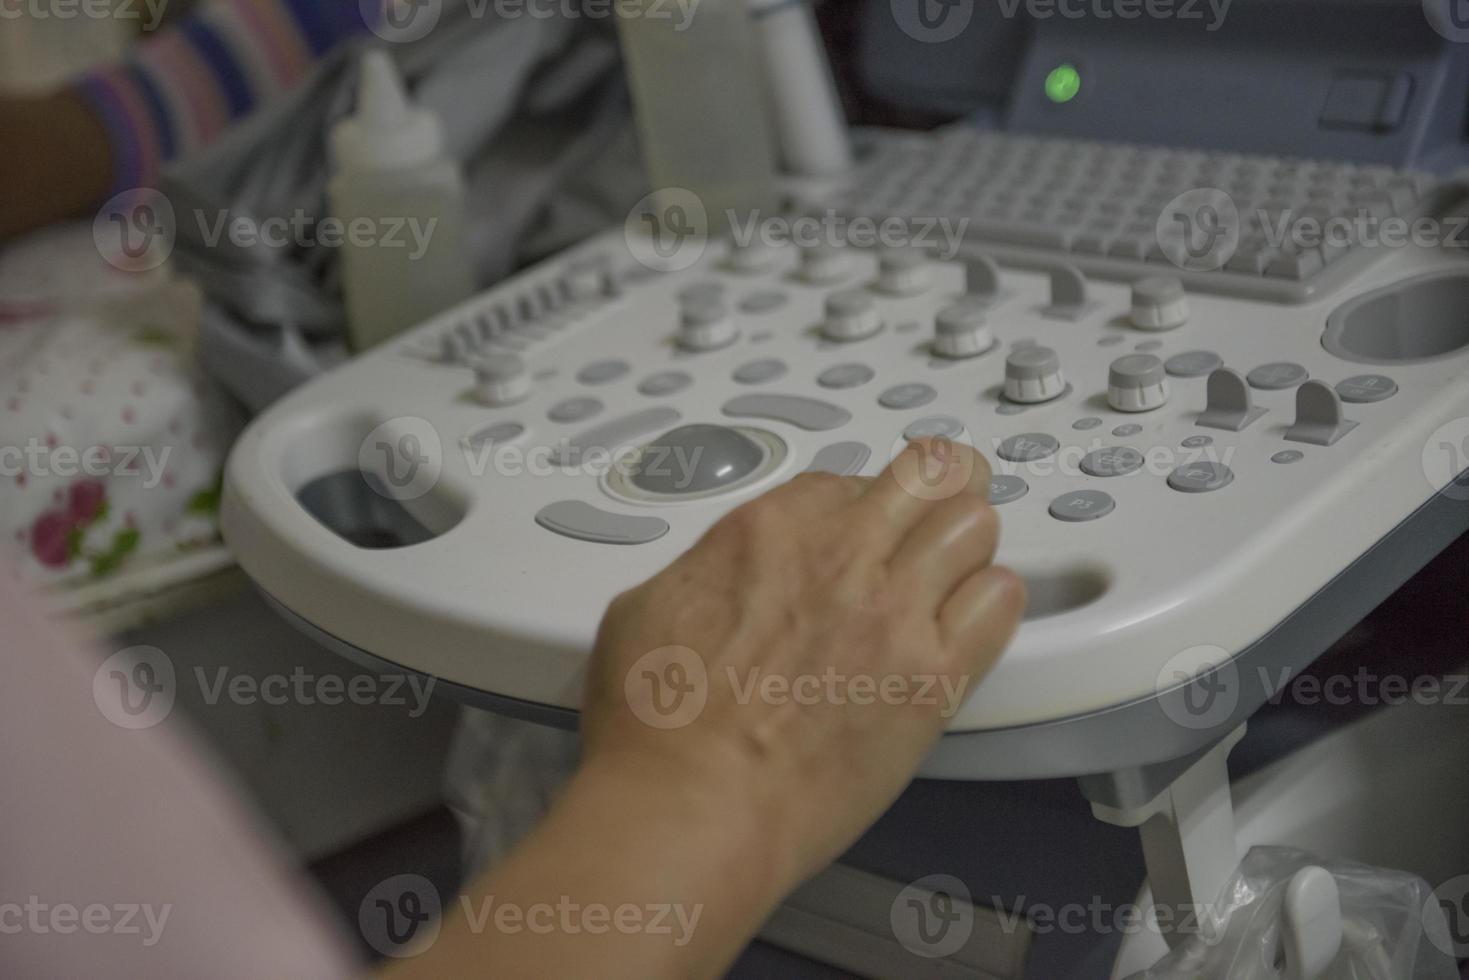 ultrasound machine There is a hand on the control panel. Medical staff perform ultrasound of pregnant women. photo